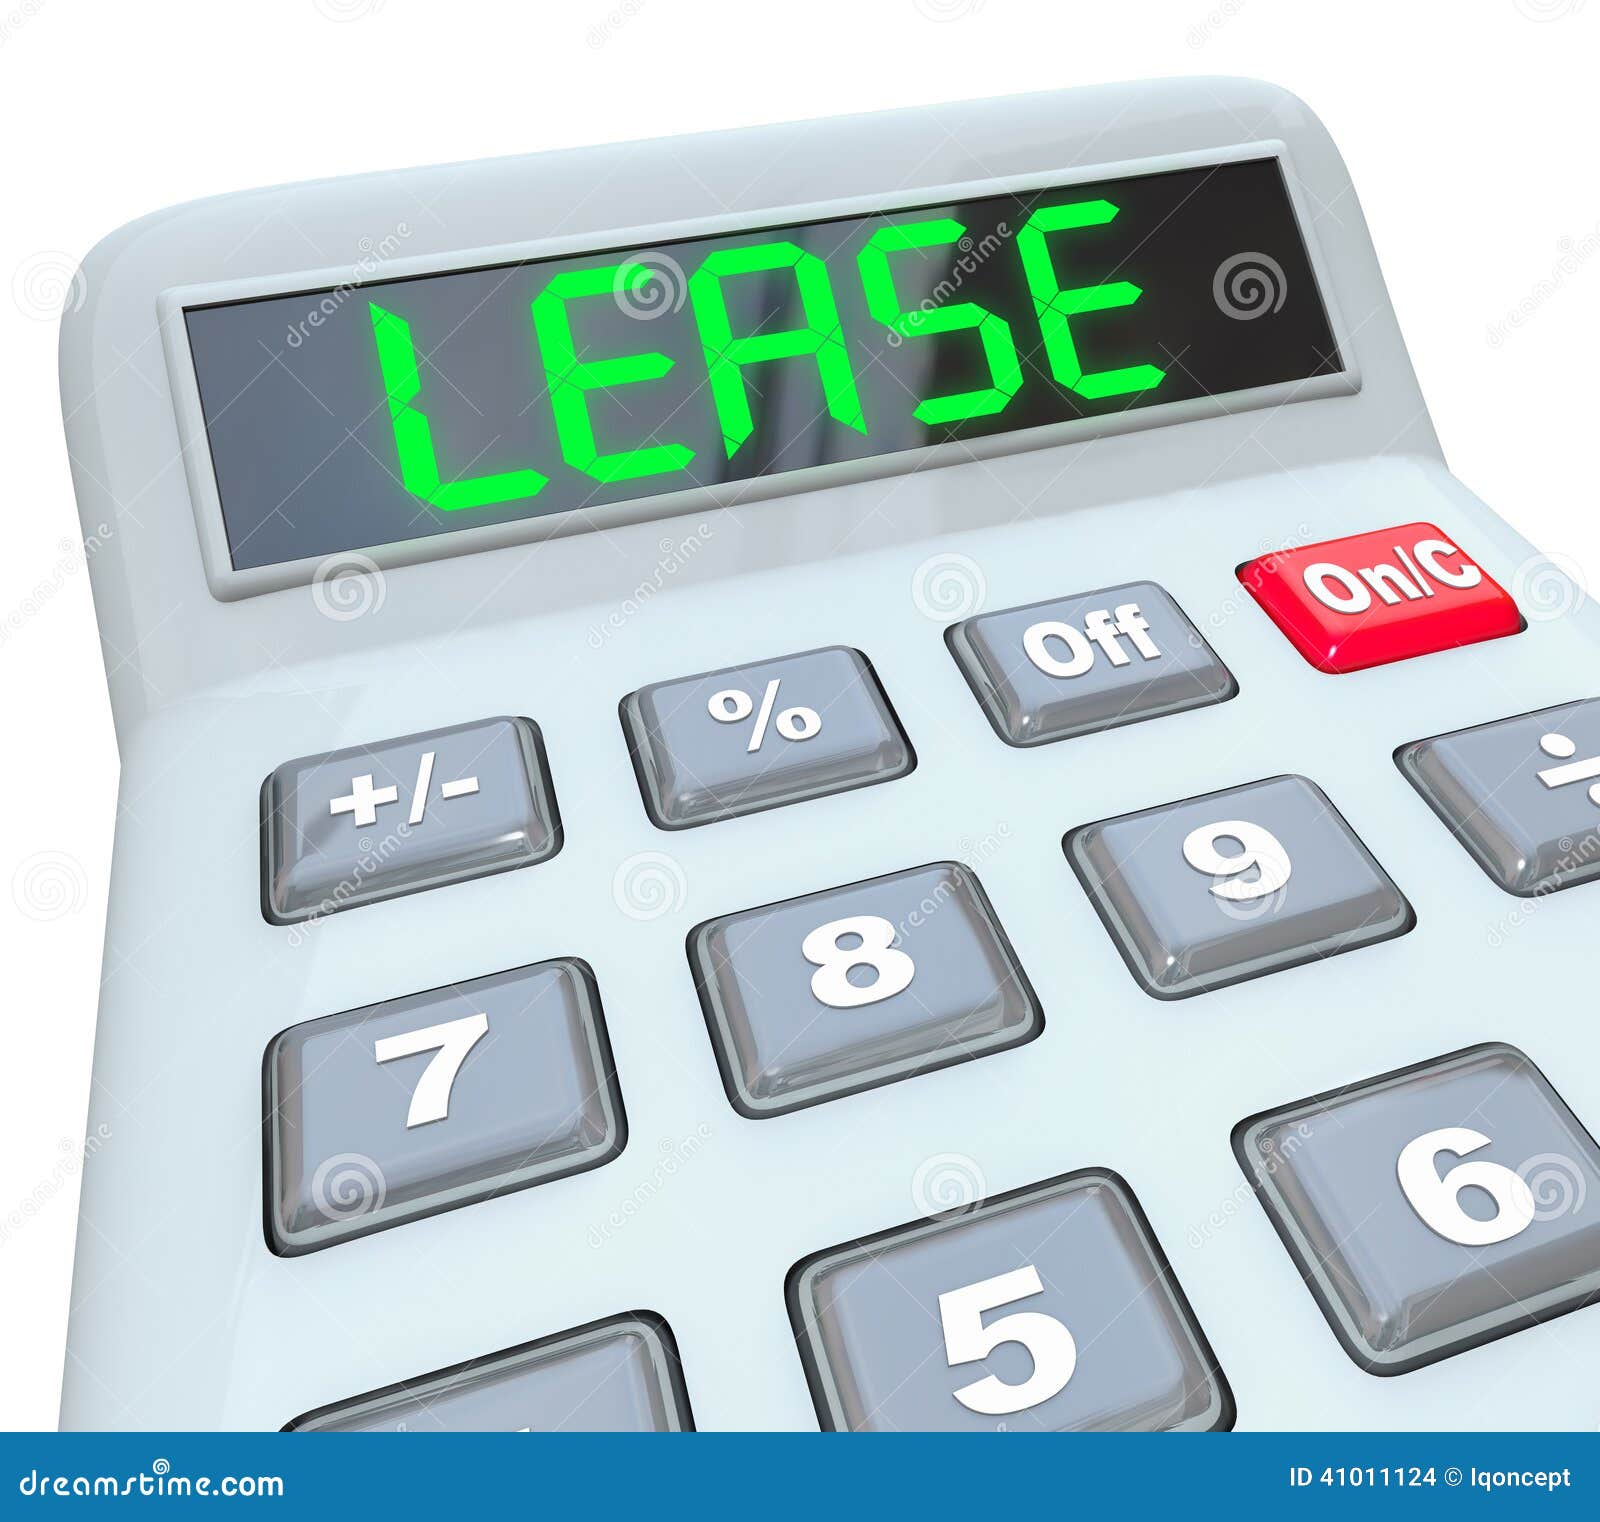 lease word calculator compare buying vs leasing better deal